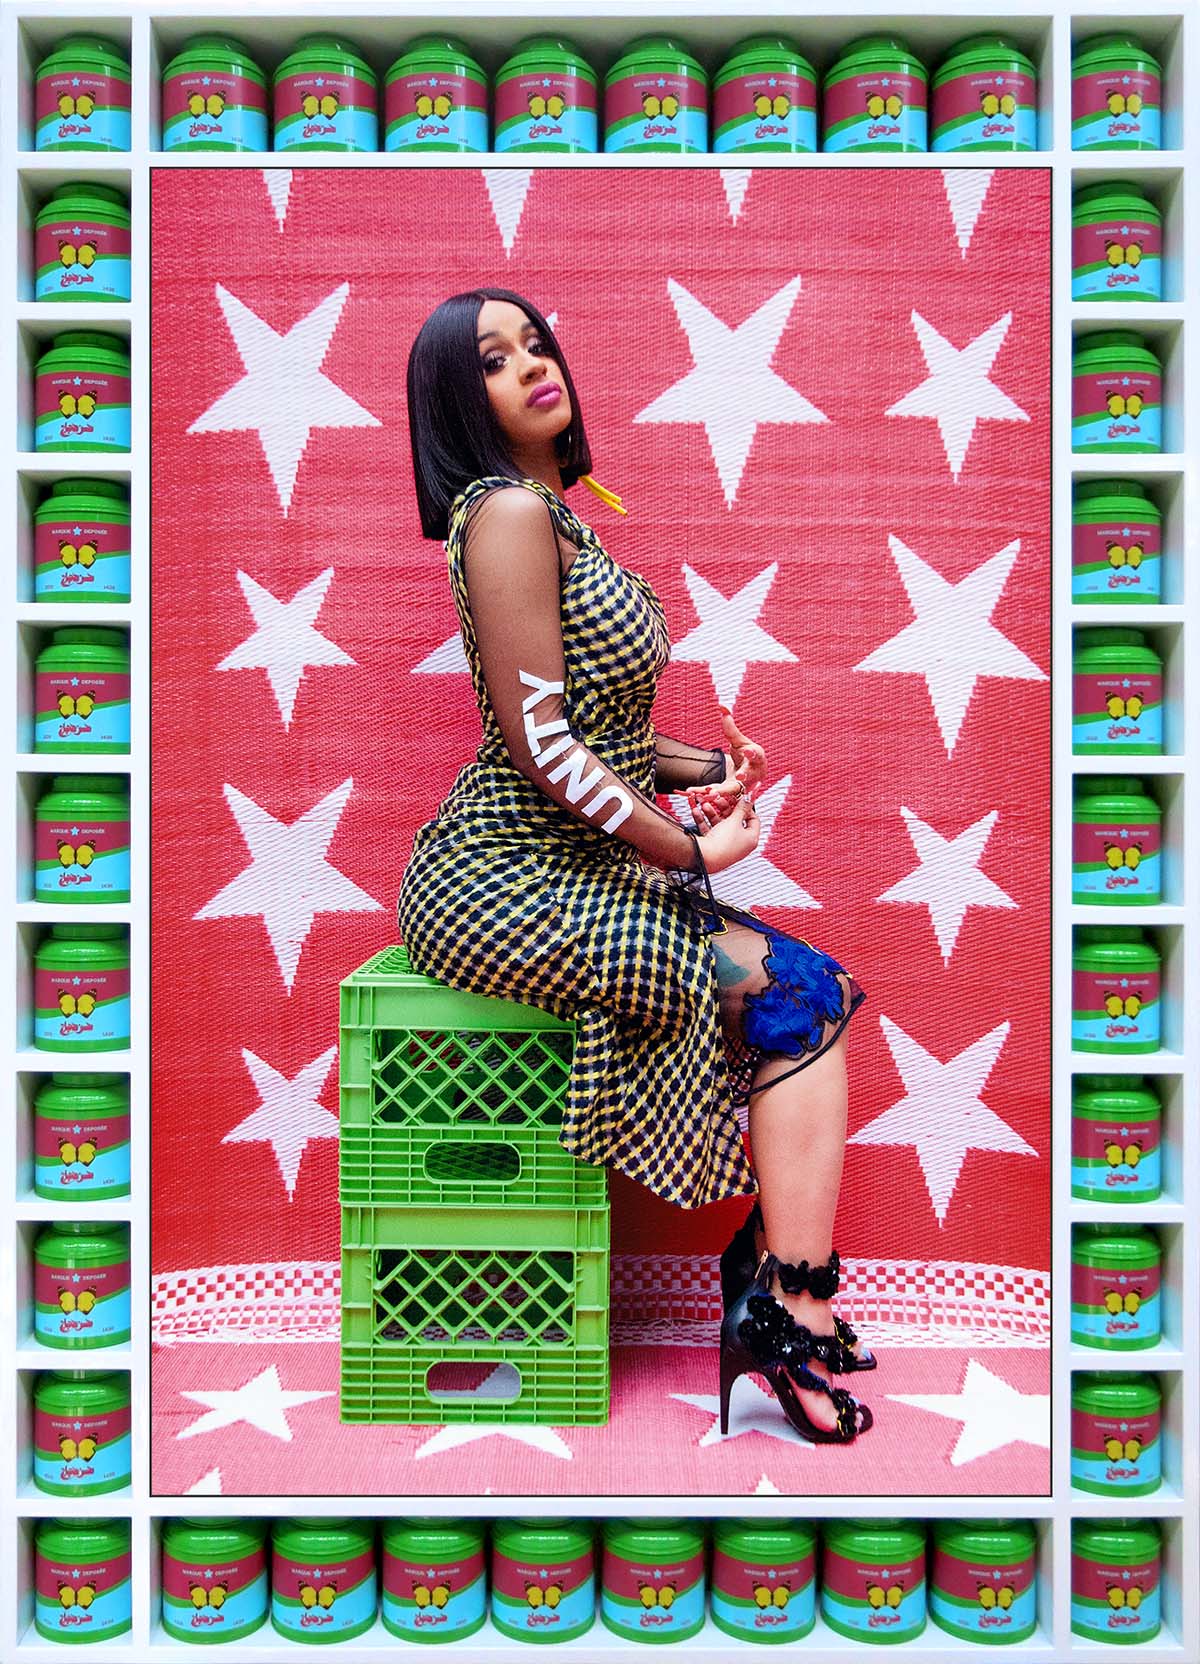 Cardi B sits on two green milk crates and looks at the camera. The word "unity" is spelled out on her arm. The image is surrounded by a border made of bright green, blue, and pink tea boxes.